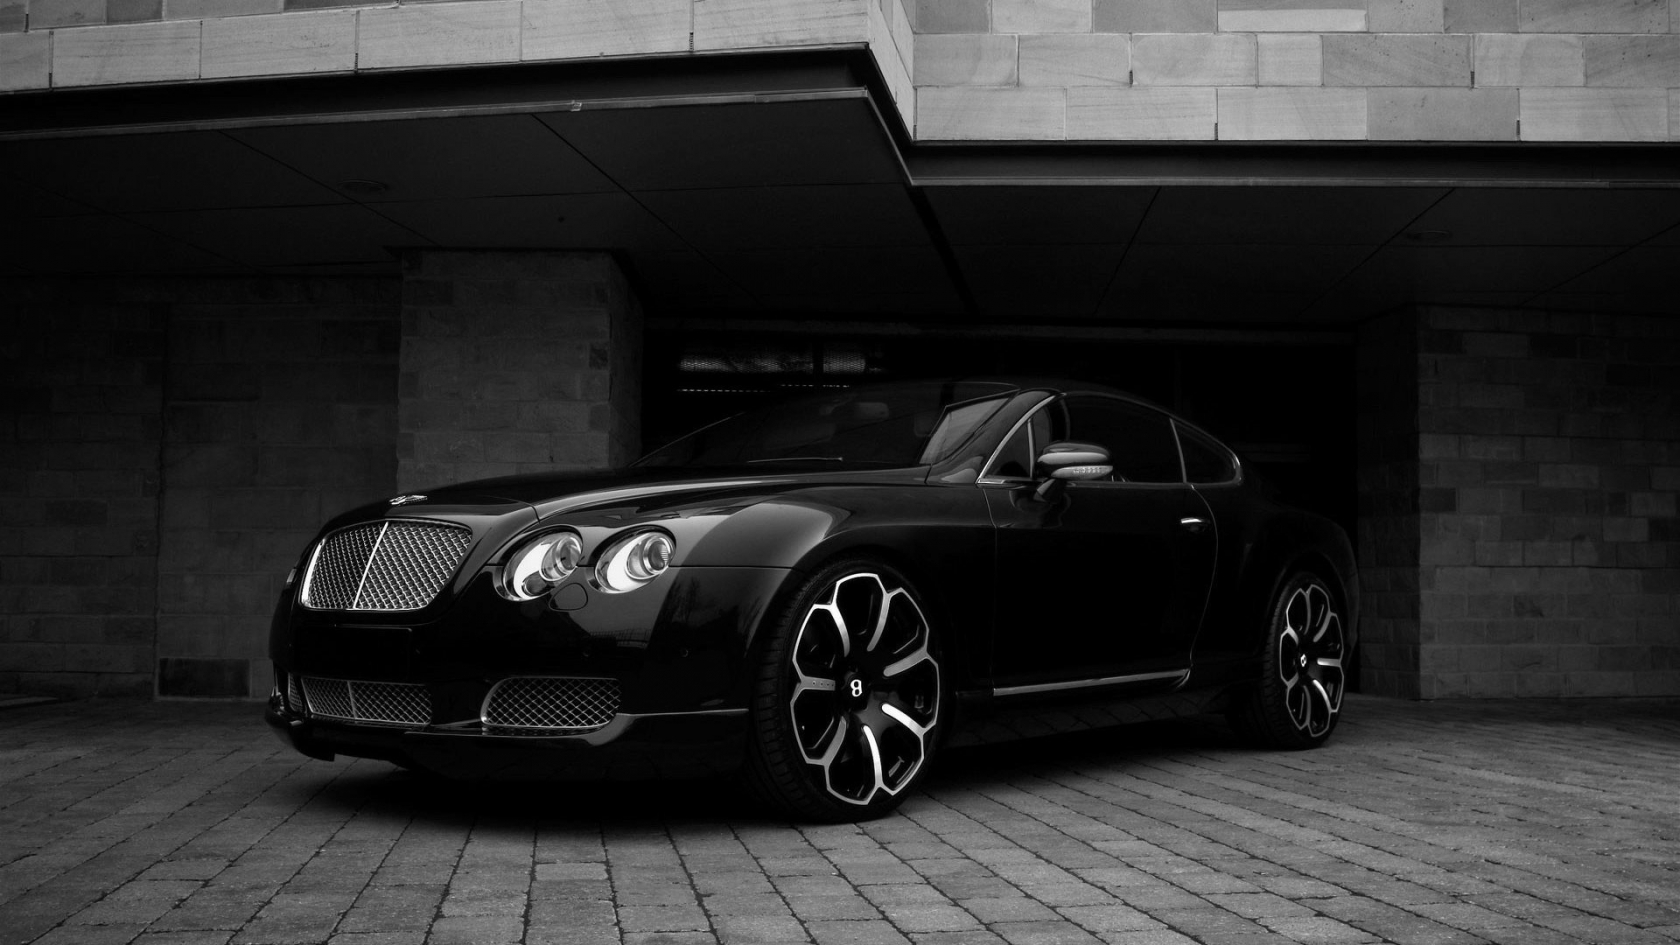 Black Bentley Front Angle for 1680 x 945 HDTV resolution